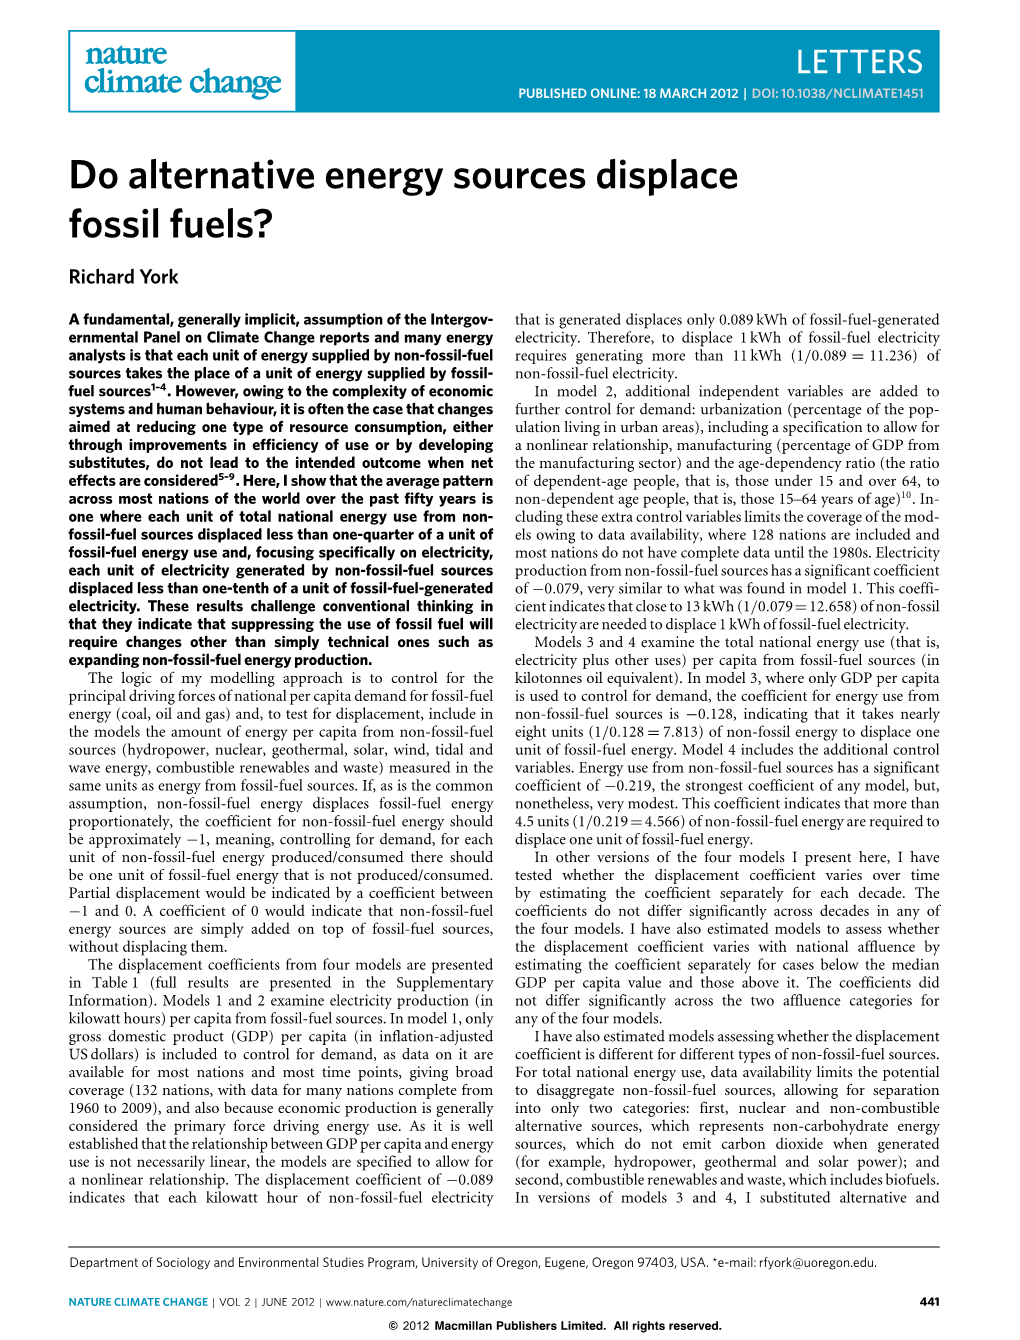 Do Alternative Energy Sources Displace Fossil Fuels?